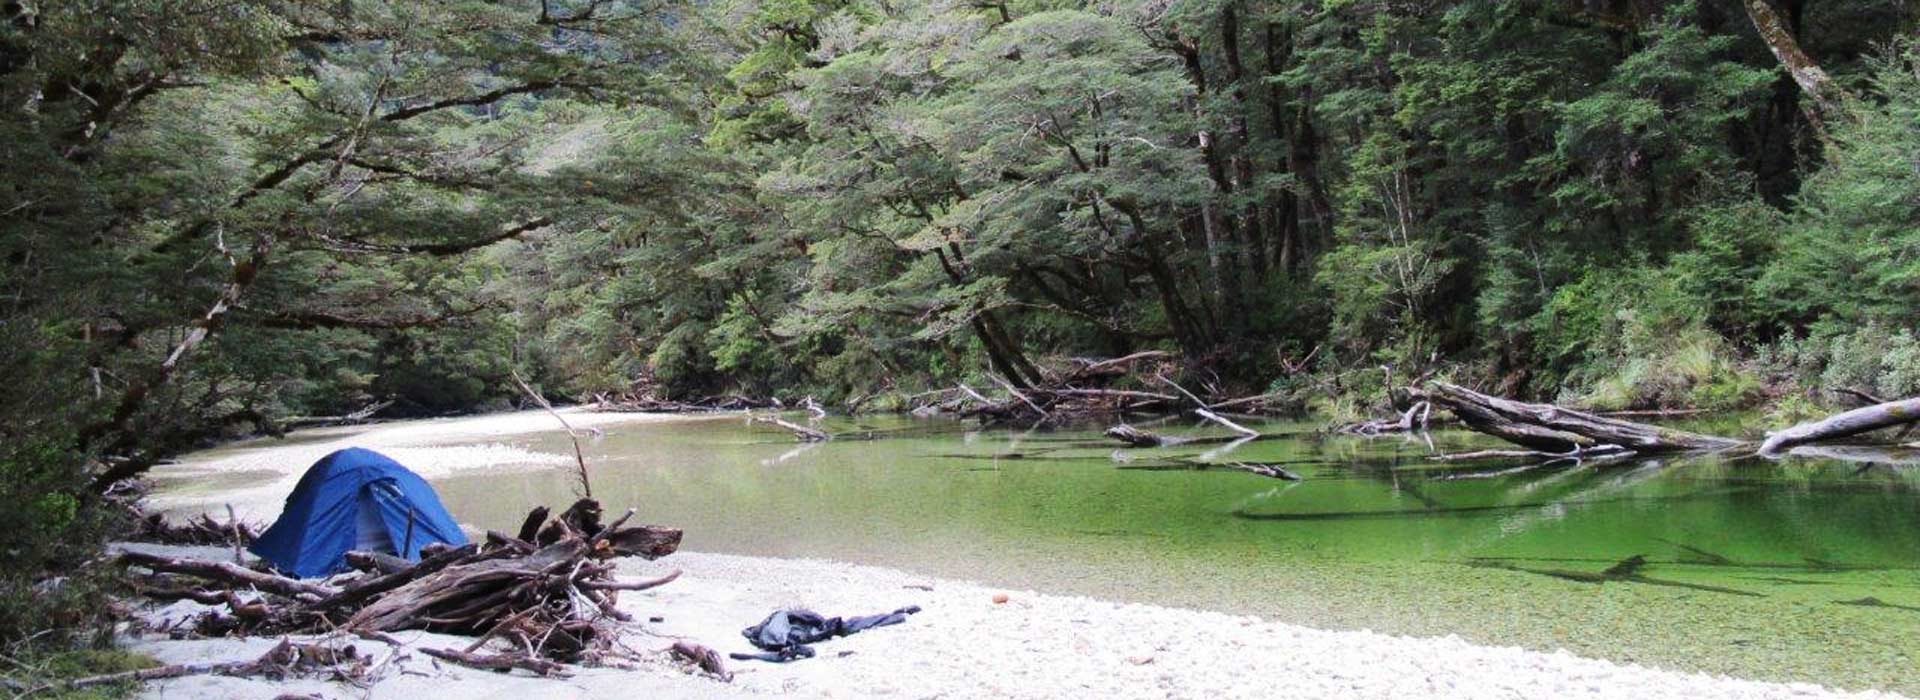 Hiking and trout fishing guide for the top of New Zealand's South Island